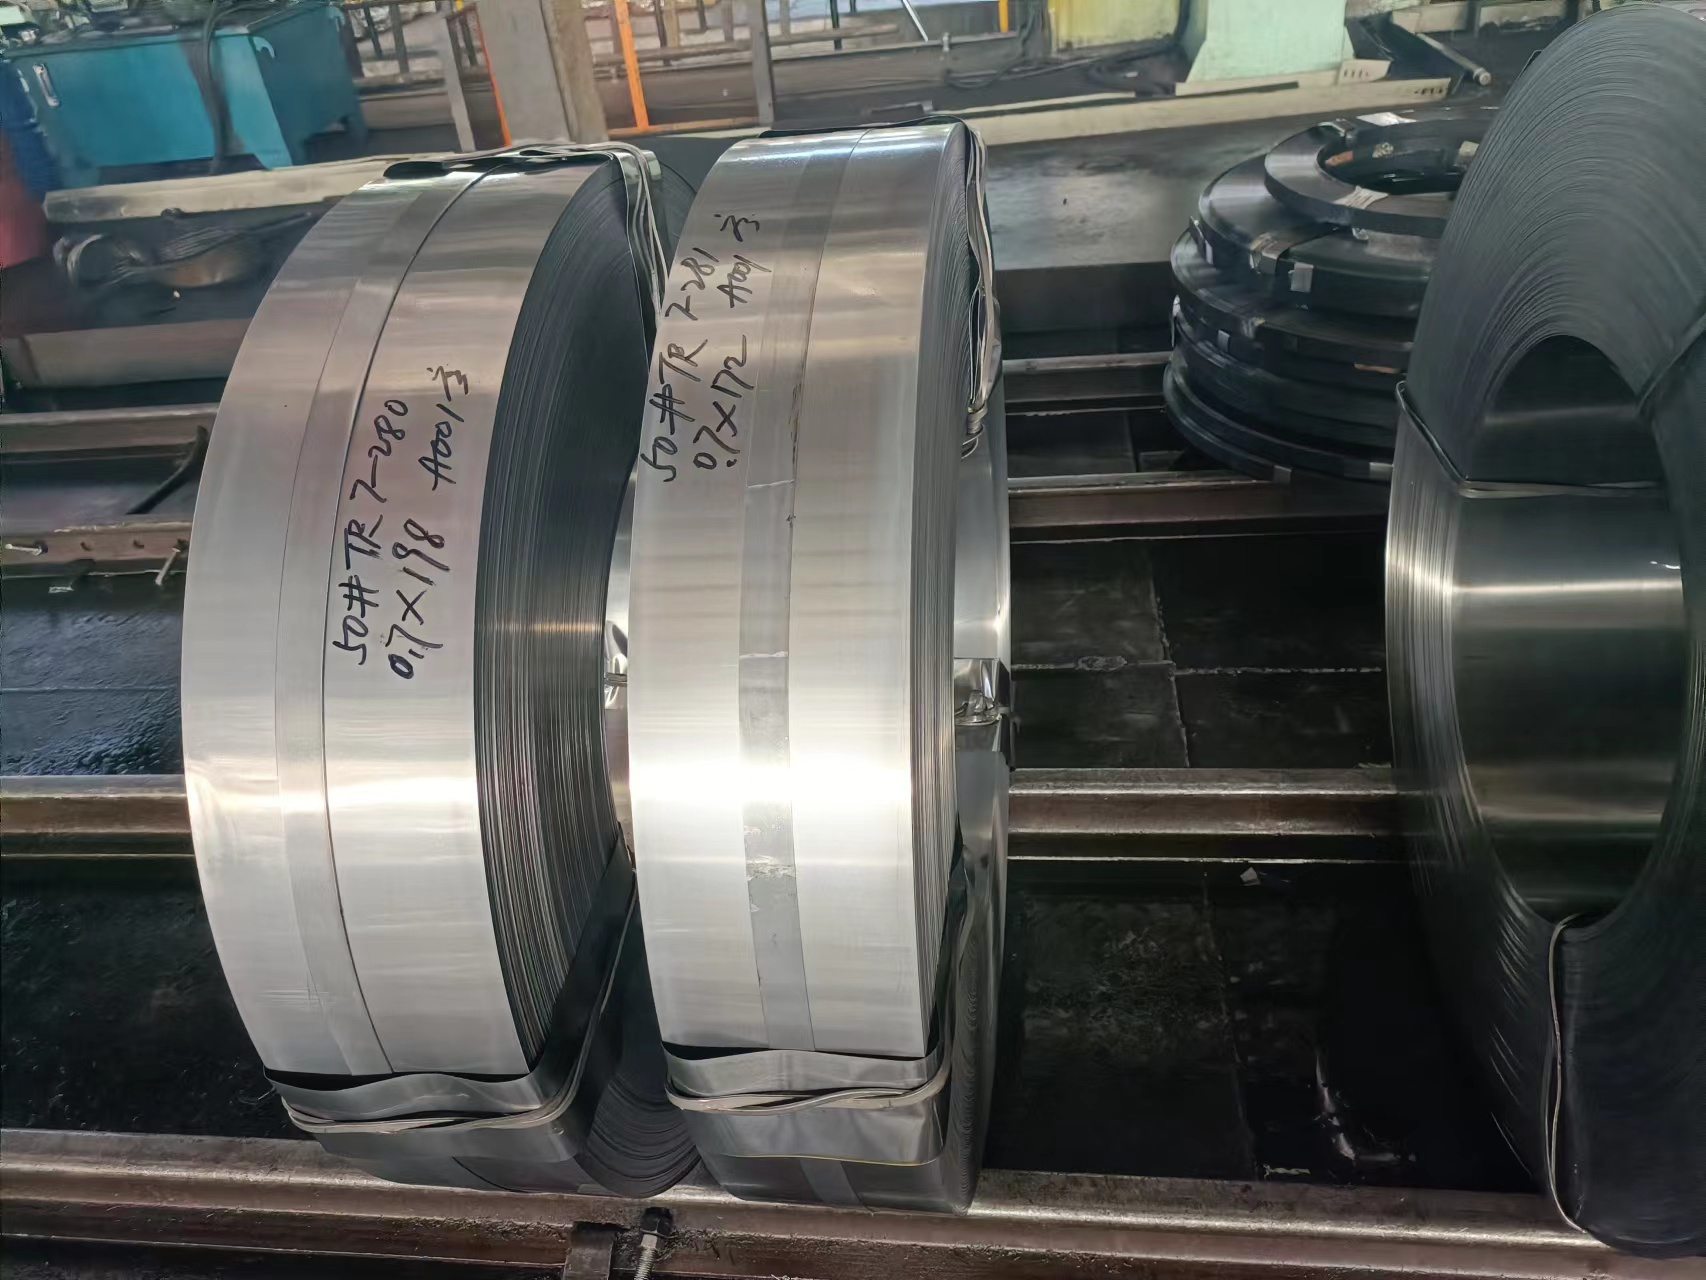 C60 S60C CK60 SAE 1060 cold rolled carbon steel strip